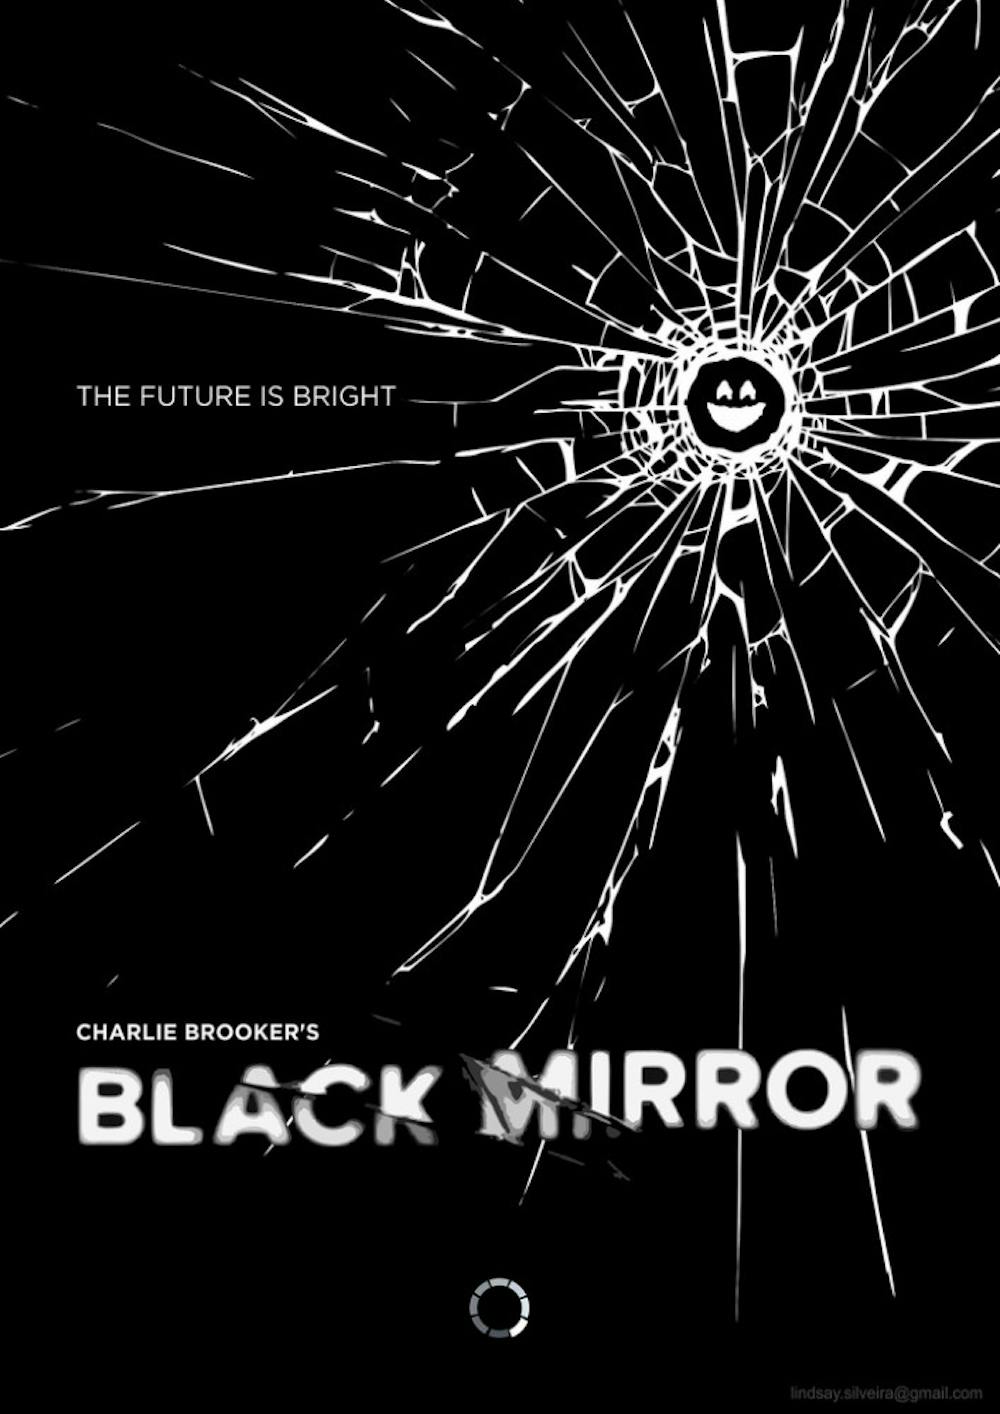 Although the show originally aired on television seven years ago, Black Mirror has recently taken the world by storm since being produced by Netflix.